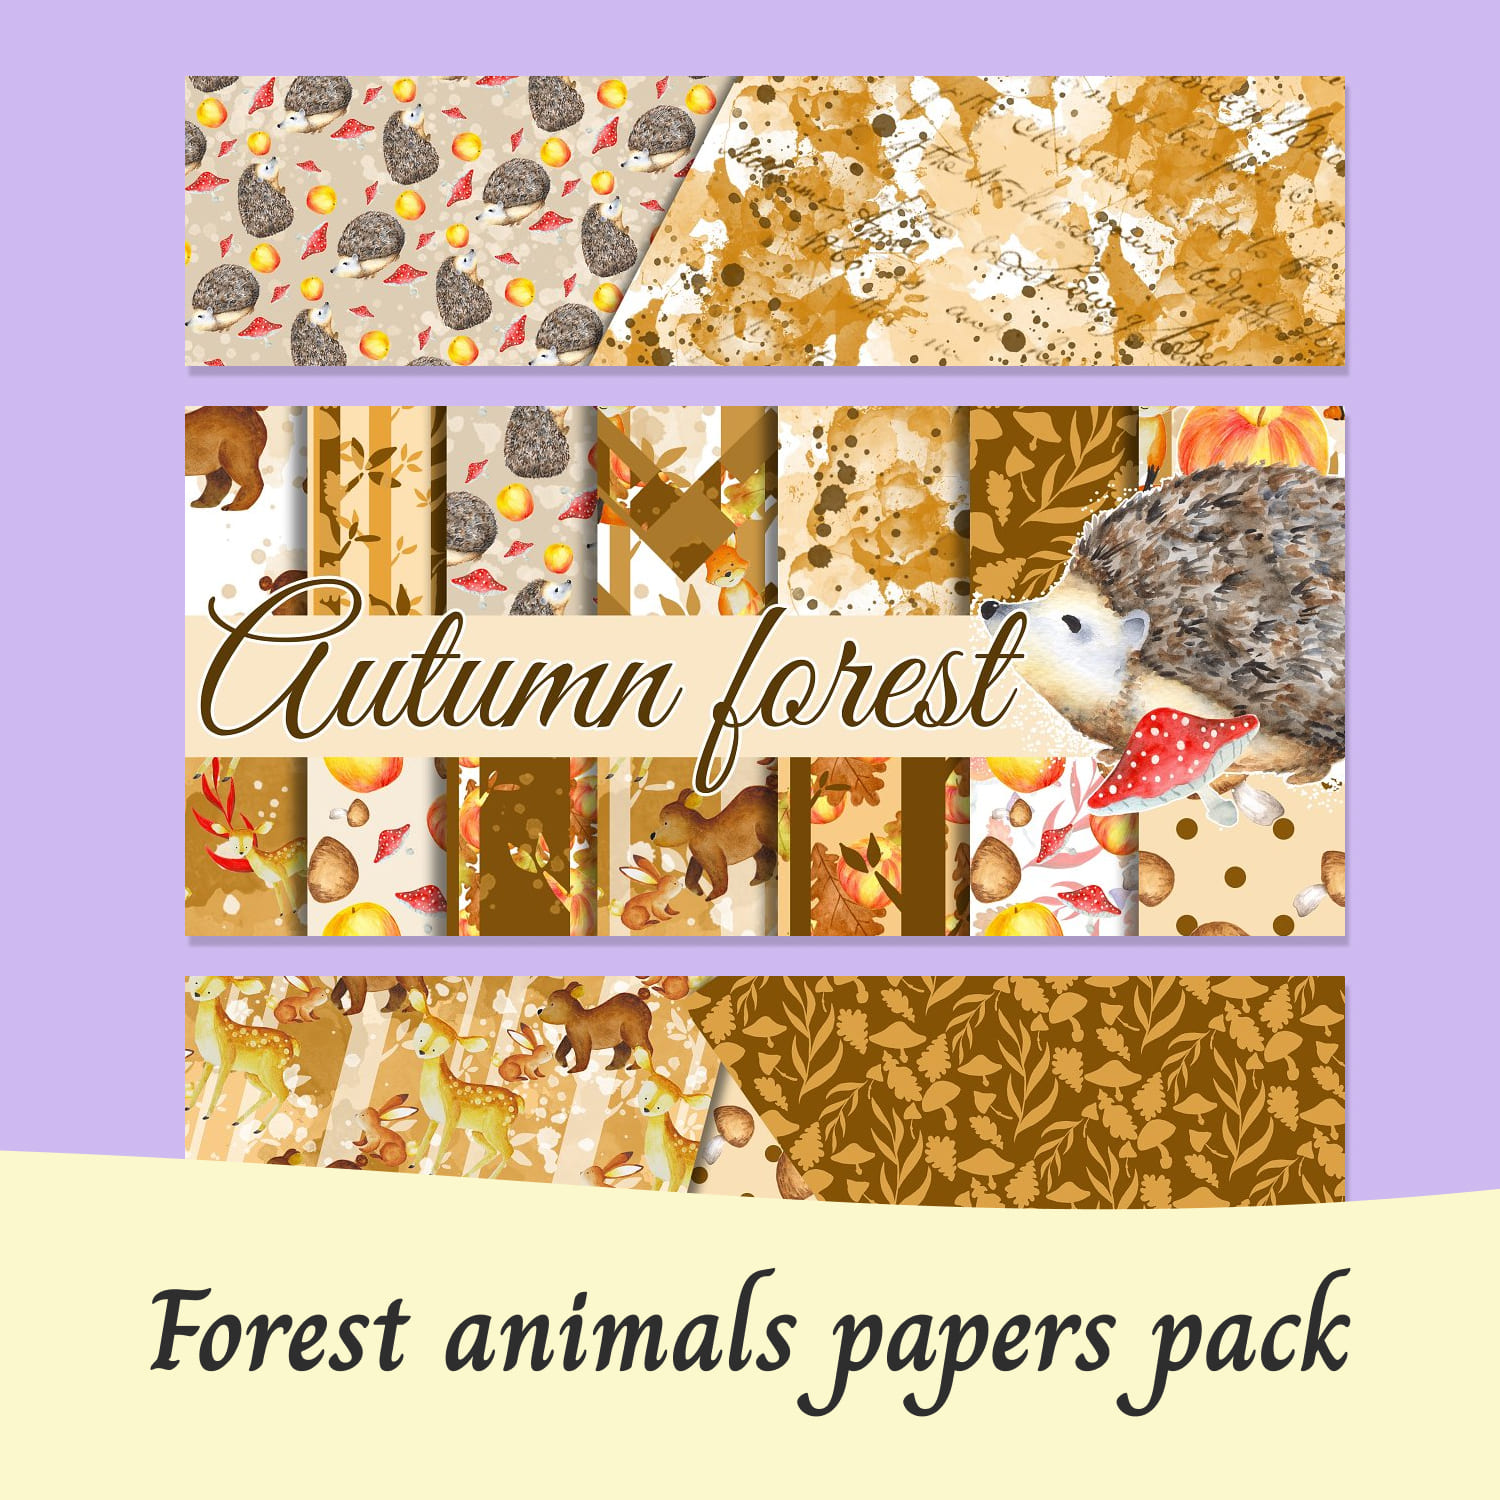 Forest Animals Papers Pack 01.